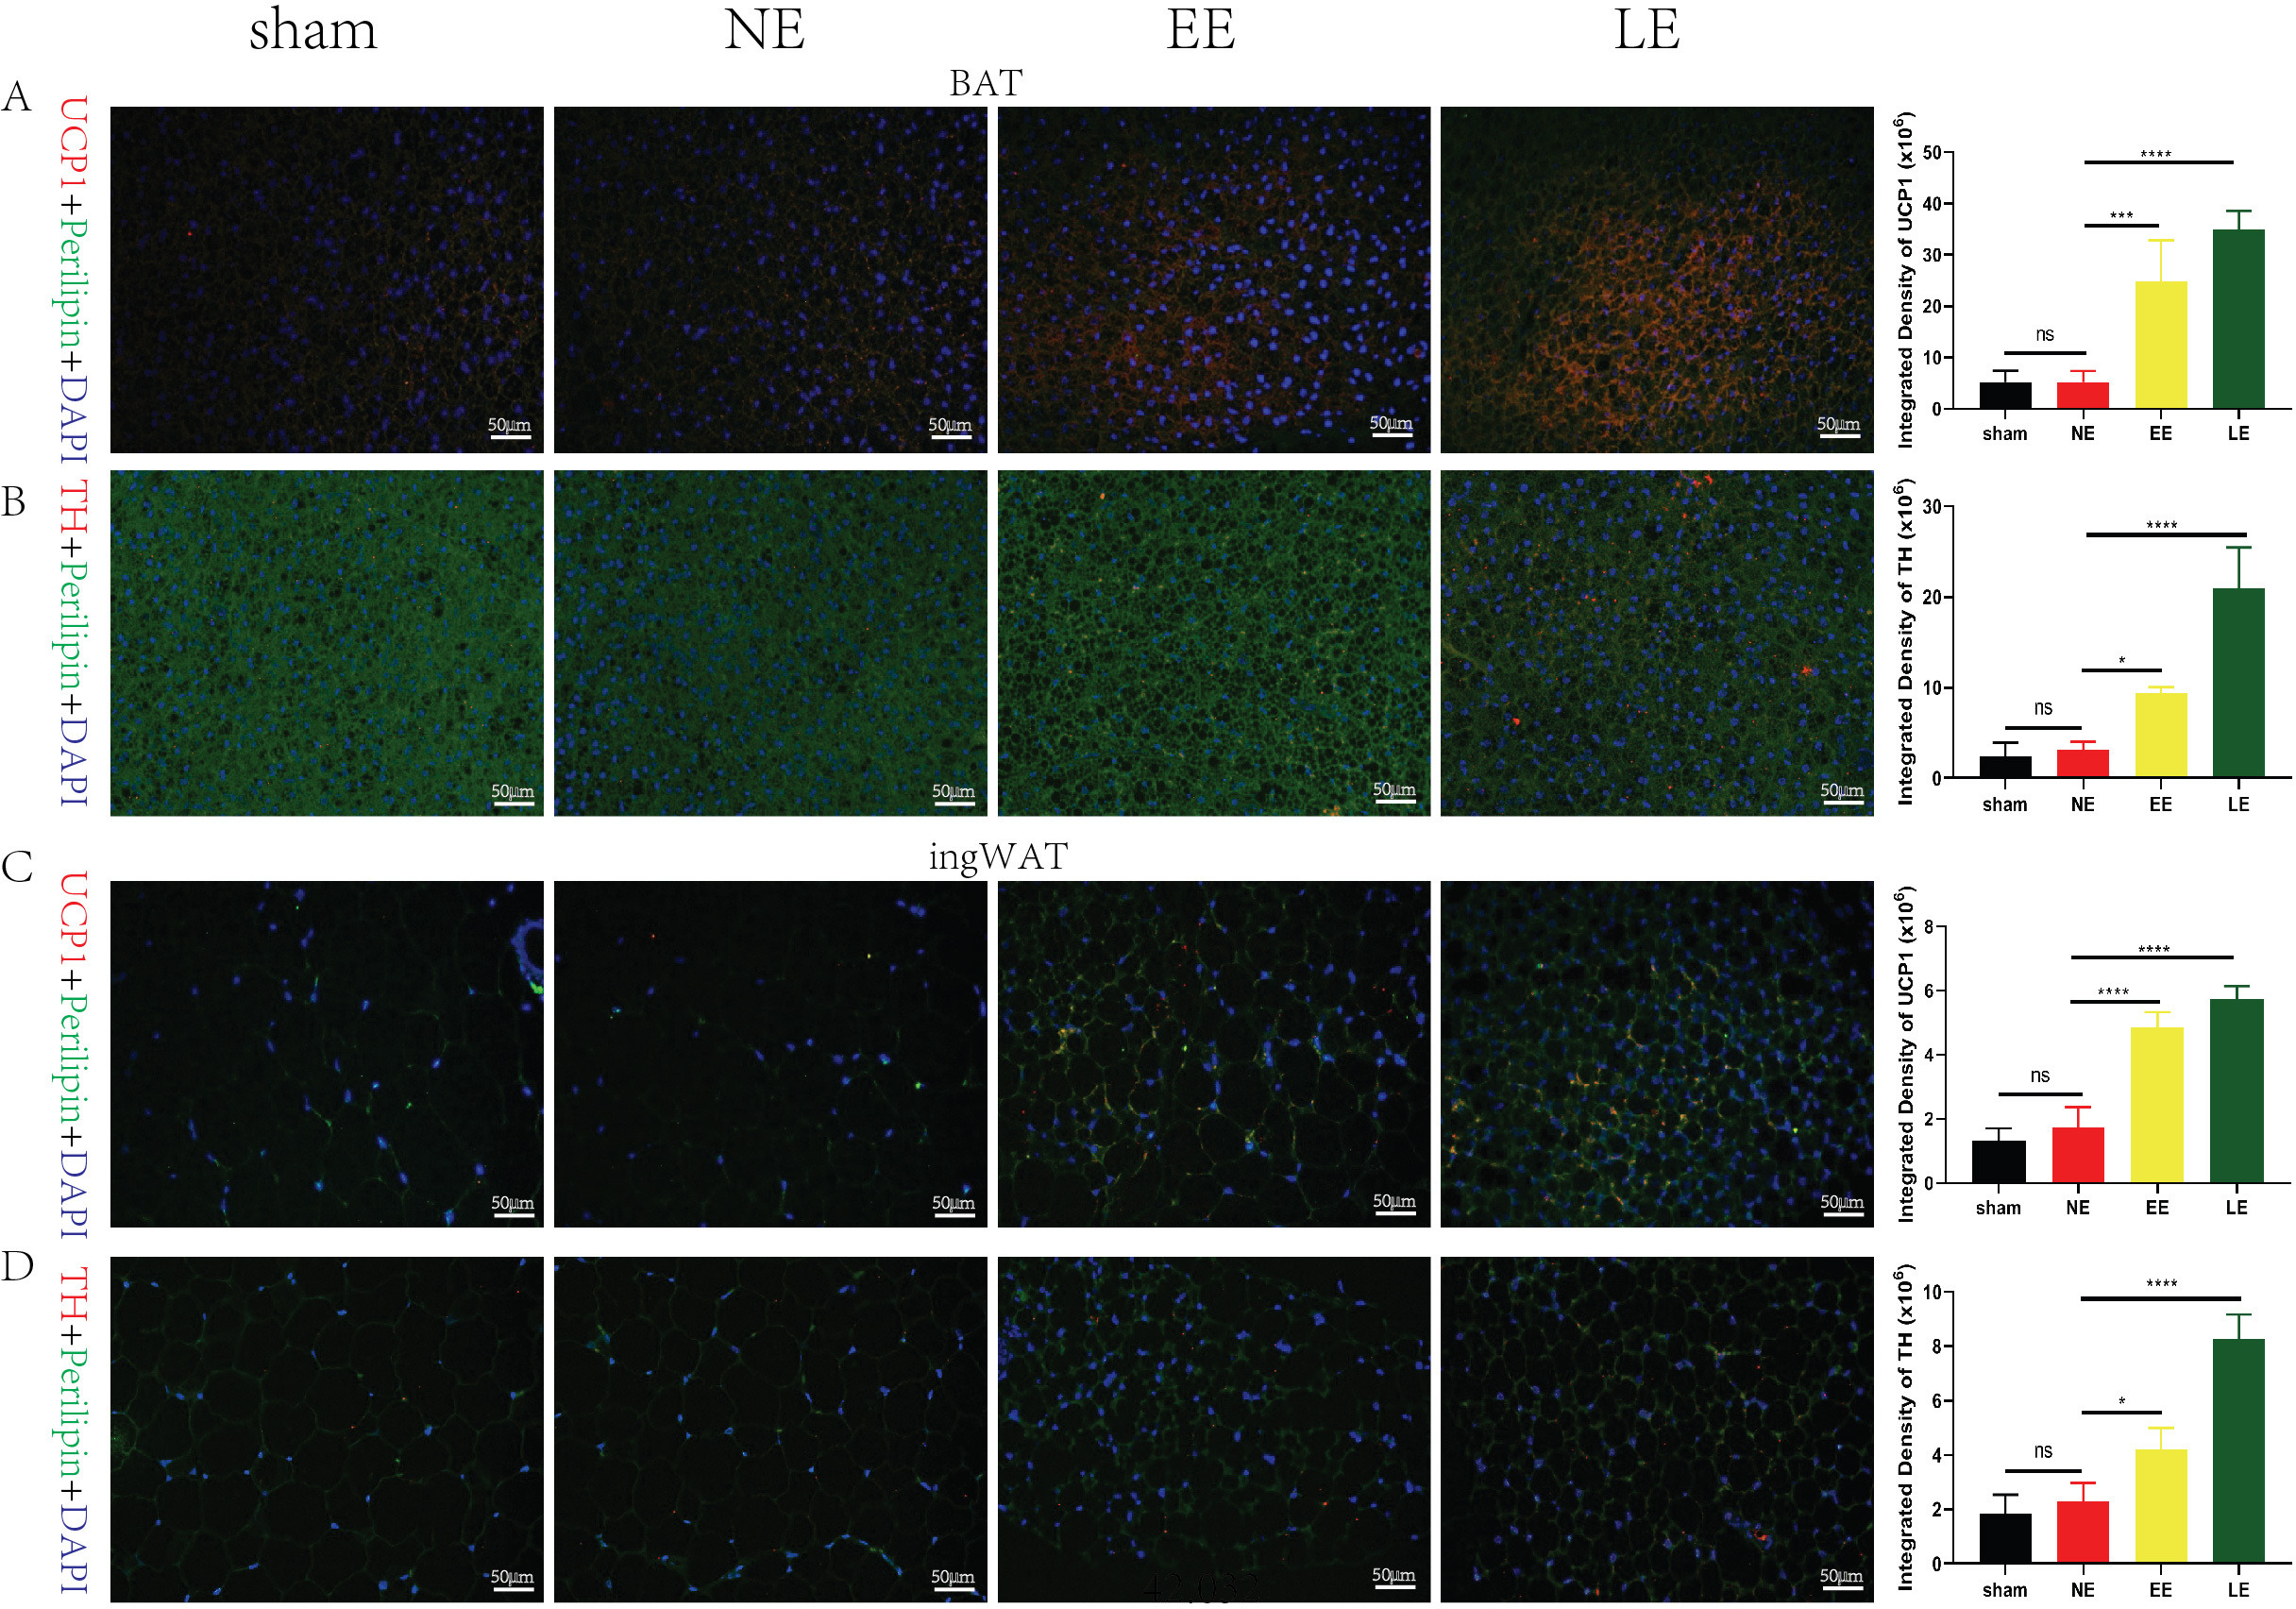 Fig. 3 
            Immunofluorescence showed the effect of high-intensity brown/beige-like adipose tissue (BAT) and inguinal subcutaneous white fat (ingWAT) (n = 5 per group). In a) and b) interscapular brown fat and c) and d) inguinal subcutaneous white fat. Immunofluorescence showed higher UCP1 (red) and tyrosine hydroxylase (TH) (red) expression in the early exercise (EE) and late exercise (LE) groups. *p < 0.05; ***p < 0.001; ****p < 0.0001.
          